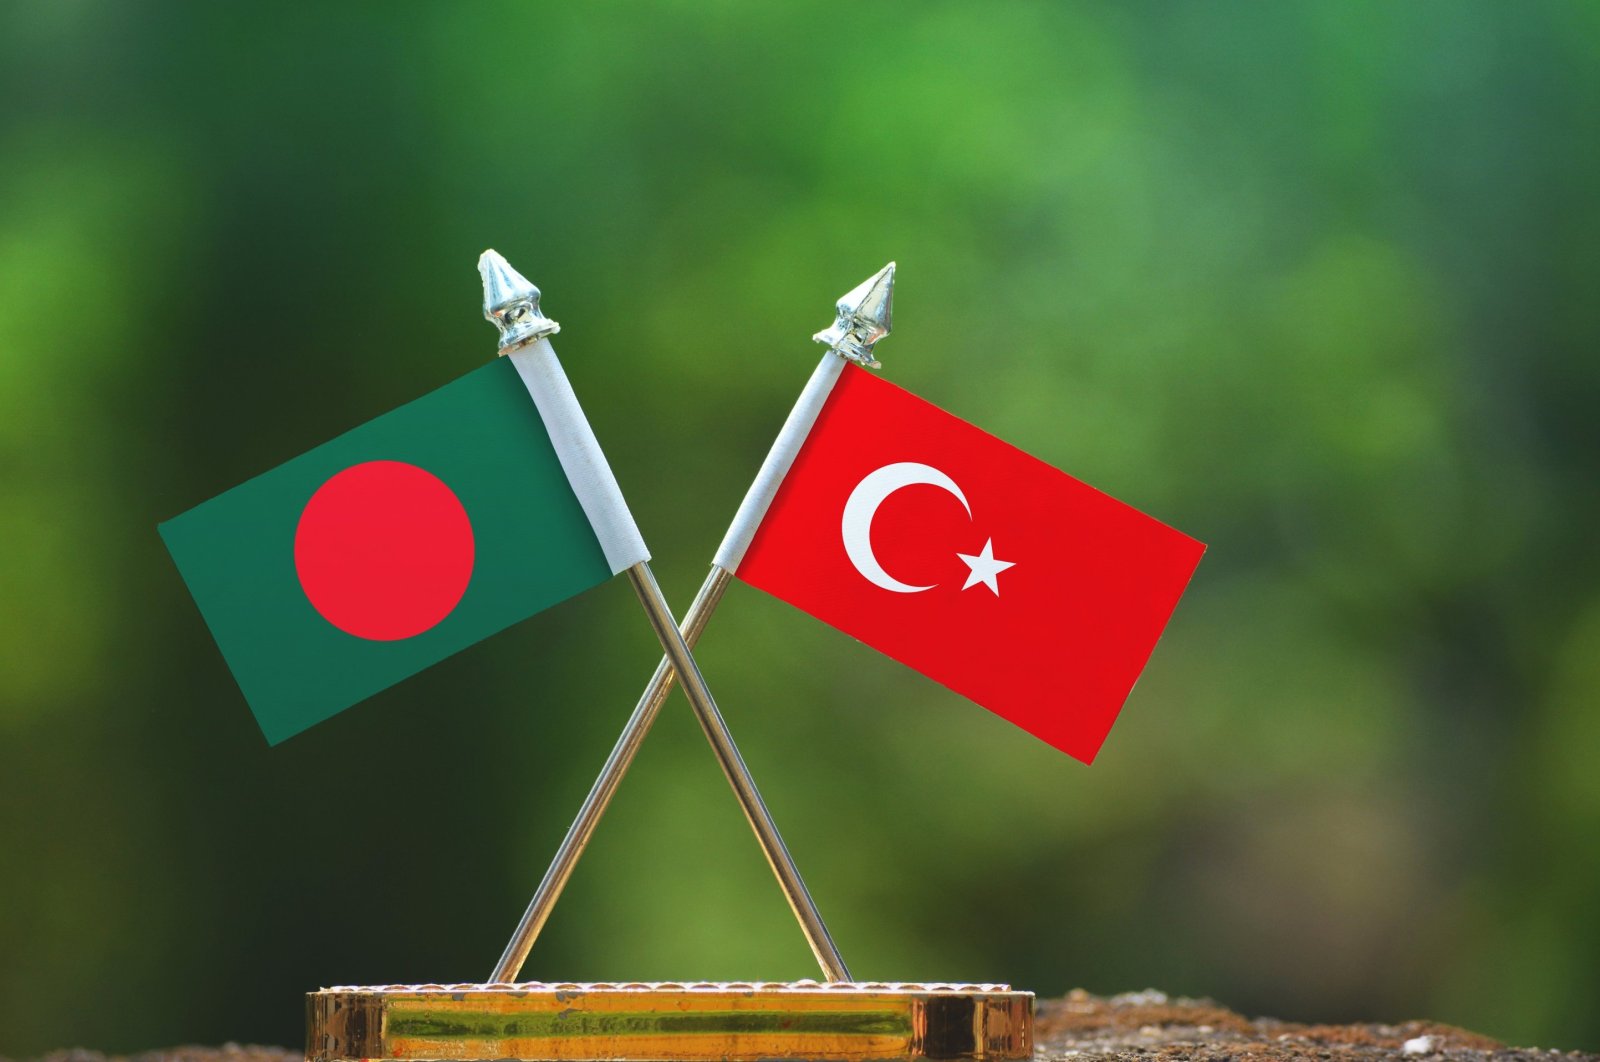 In this photo illustration, the flags of Bangladesh and Turkey are seen together with a blurred green background. (Photo by Shutterstock)